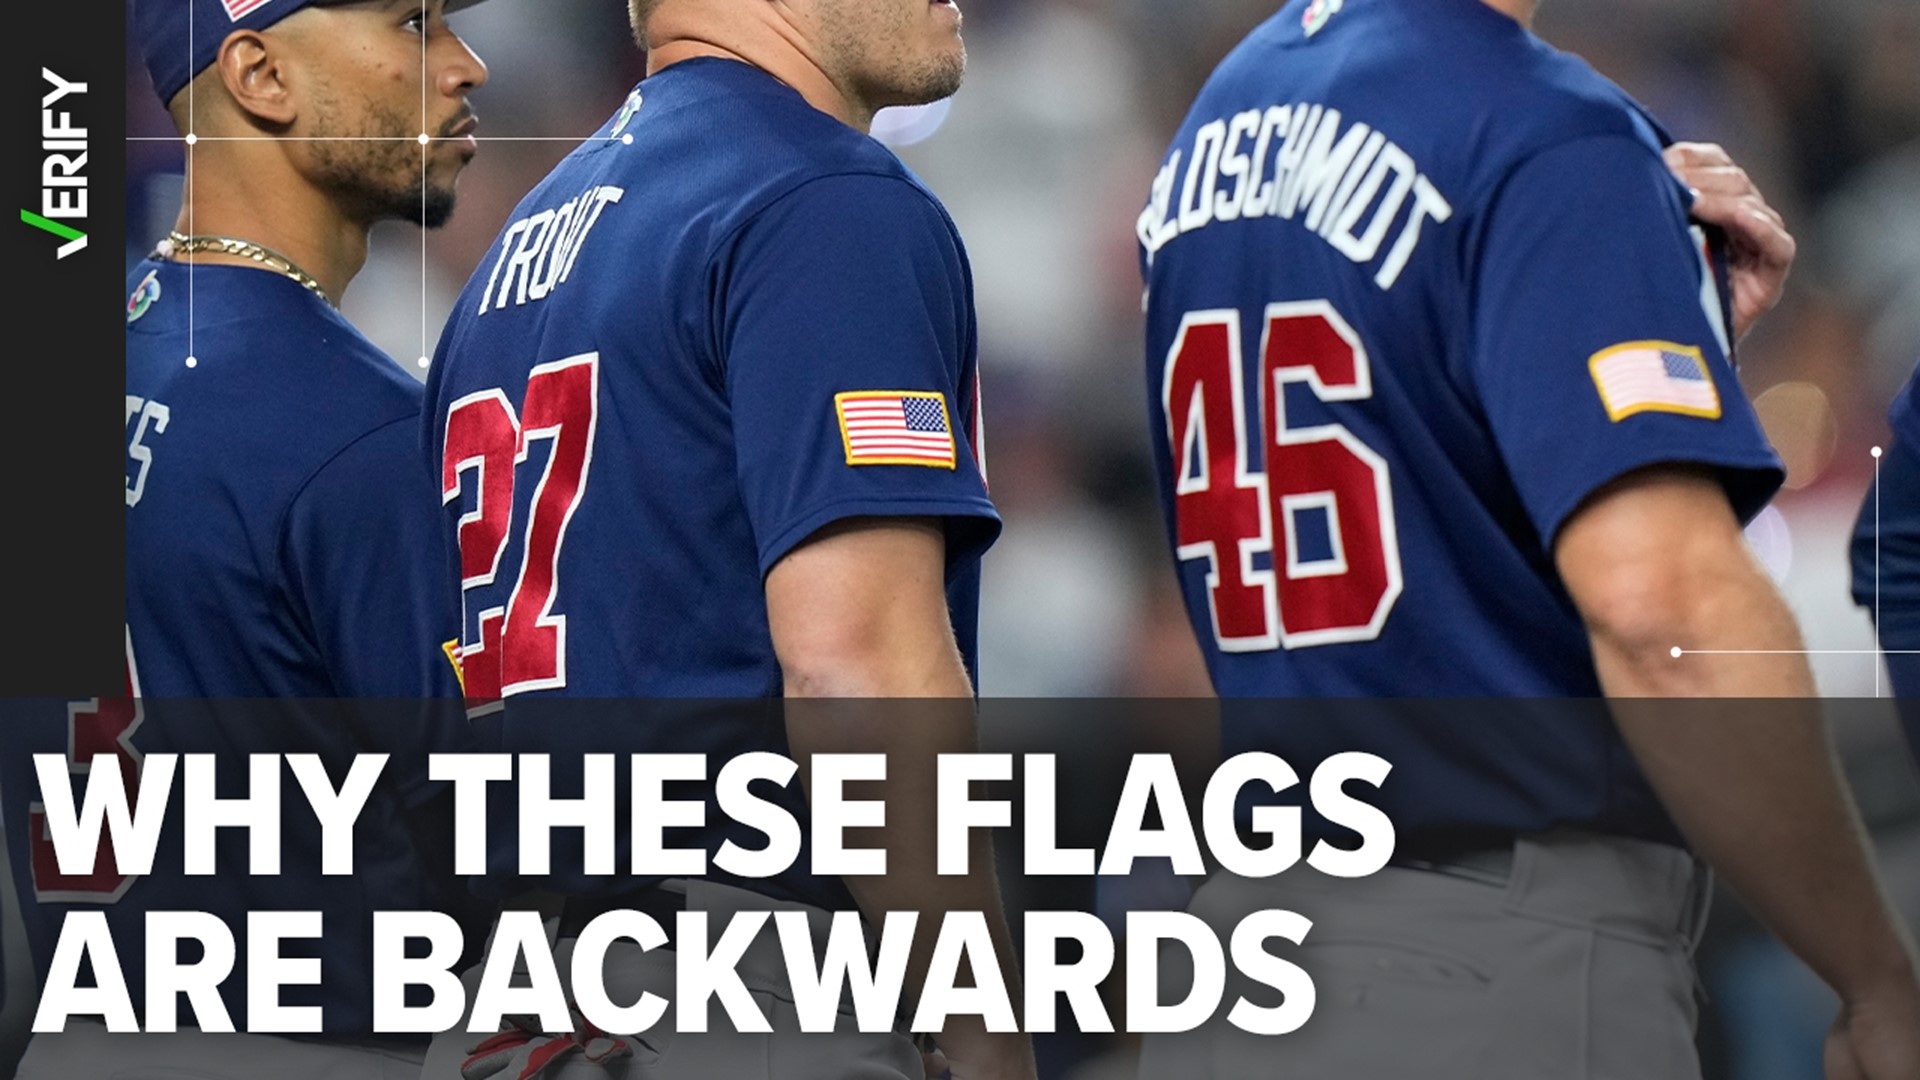 At the World Baseball Classic, Team USA copied Army regulations by having an American flag patch on their right sleeve with the stars facing forward.